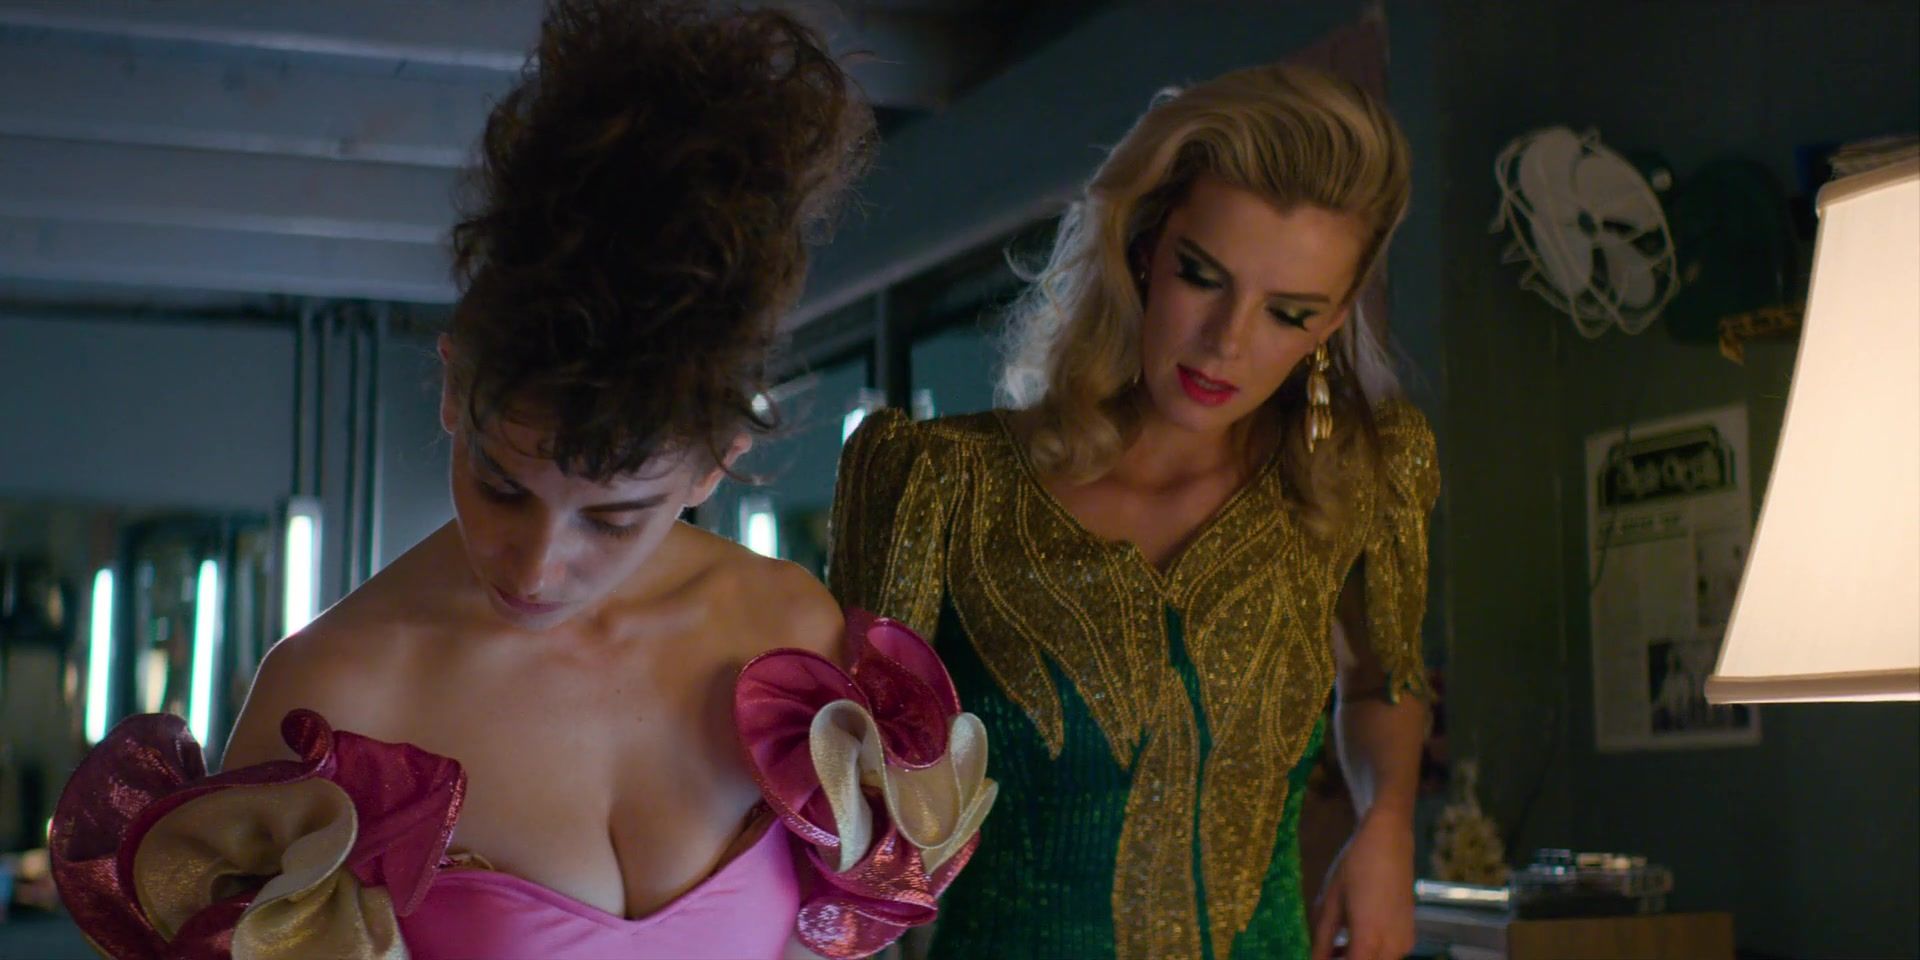 CameraBoys Alison Brie, Kate Nash nude - Glow s03e08-10 (2019) Pick Up